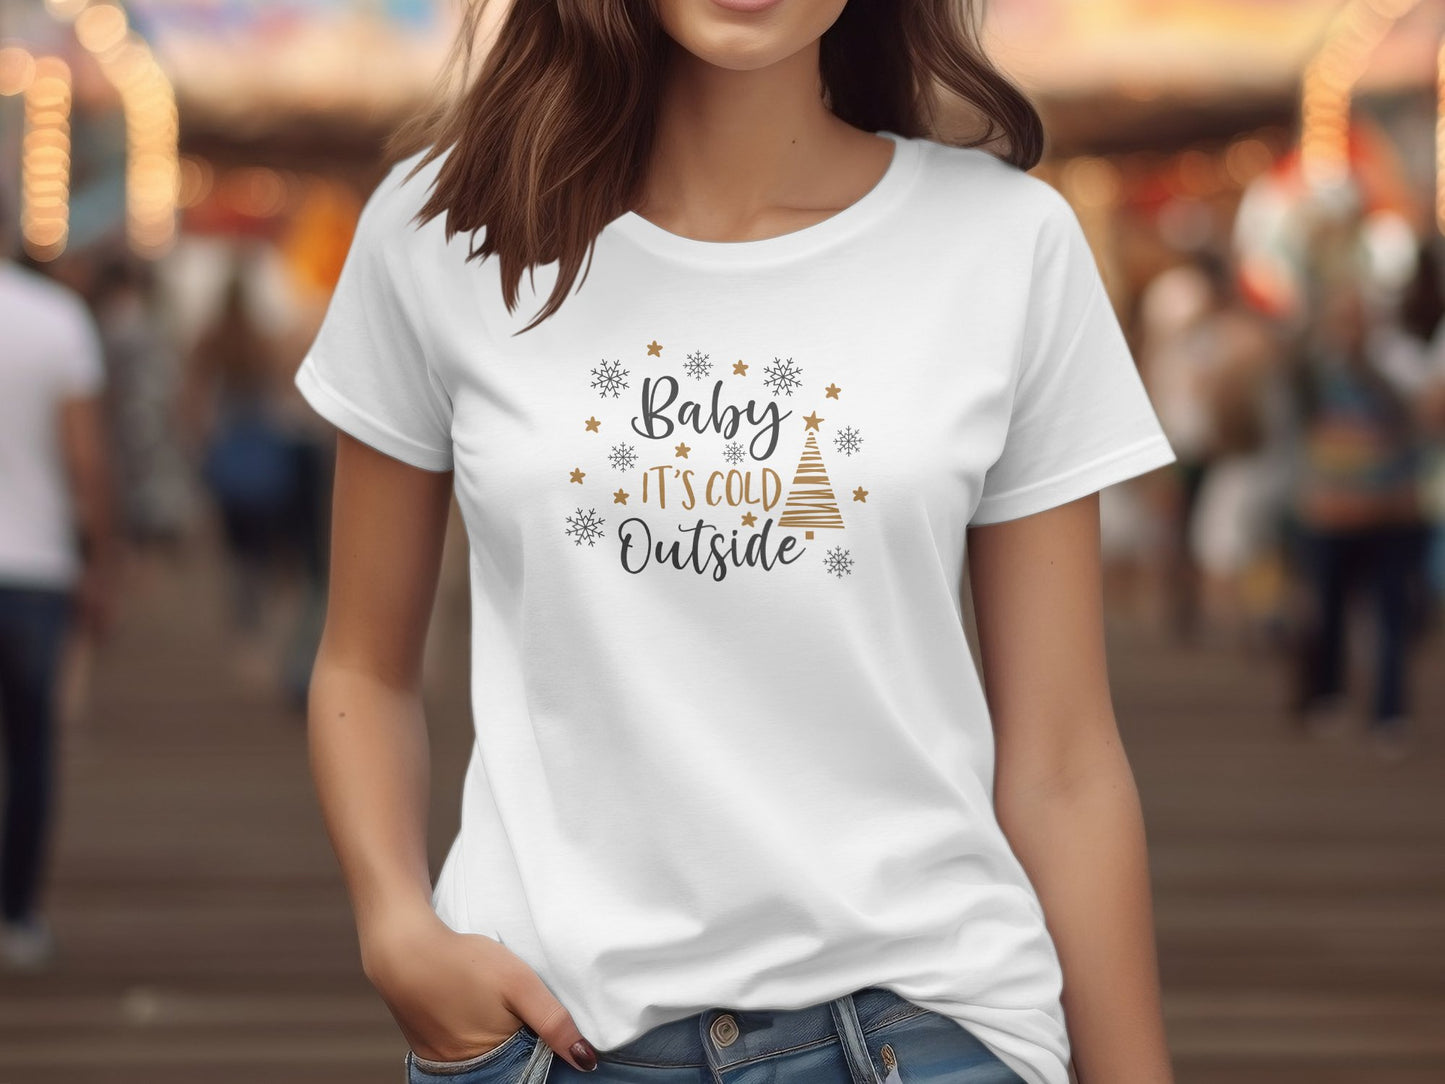 Baby its Cold Outside (Christmas T-shirt)